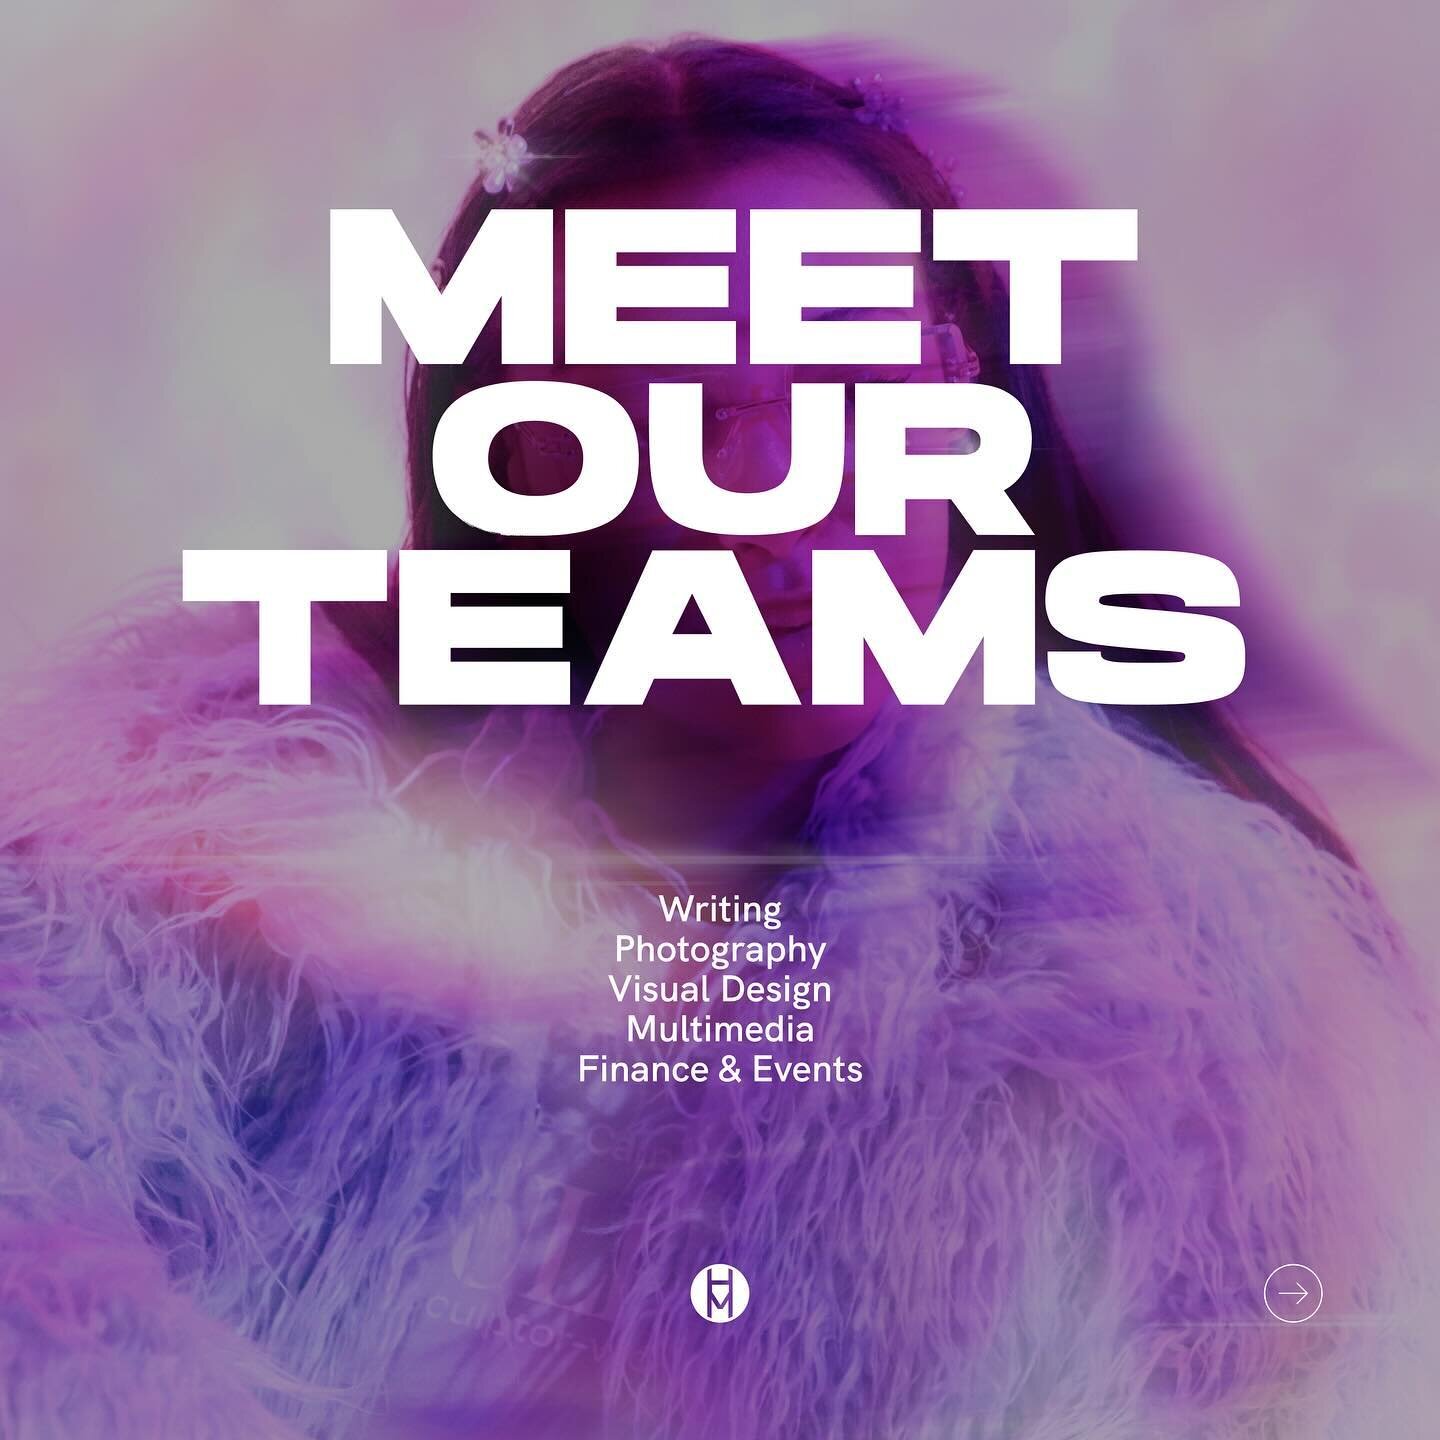 Get to know Haute&rsquo;s five teams: Writing, Photography, Visual Design, Multimedia, and Finance &amp; Events. Applicants, you may apply to as many teams as you&rsquo;d like, but remember that each team has its own application.

&mdash;

Featuring 